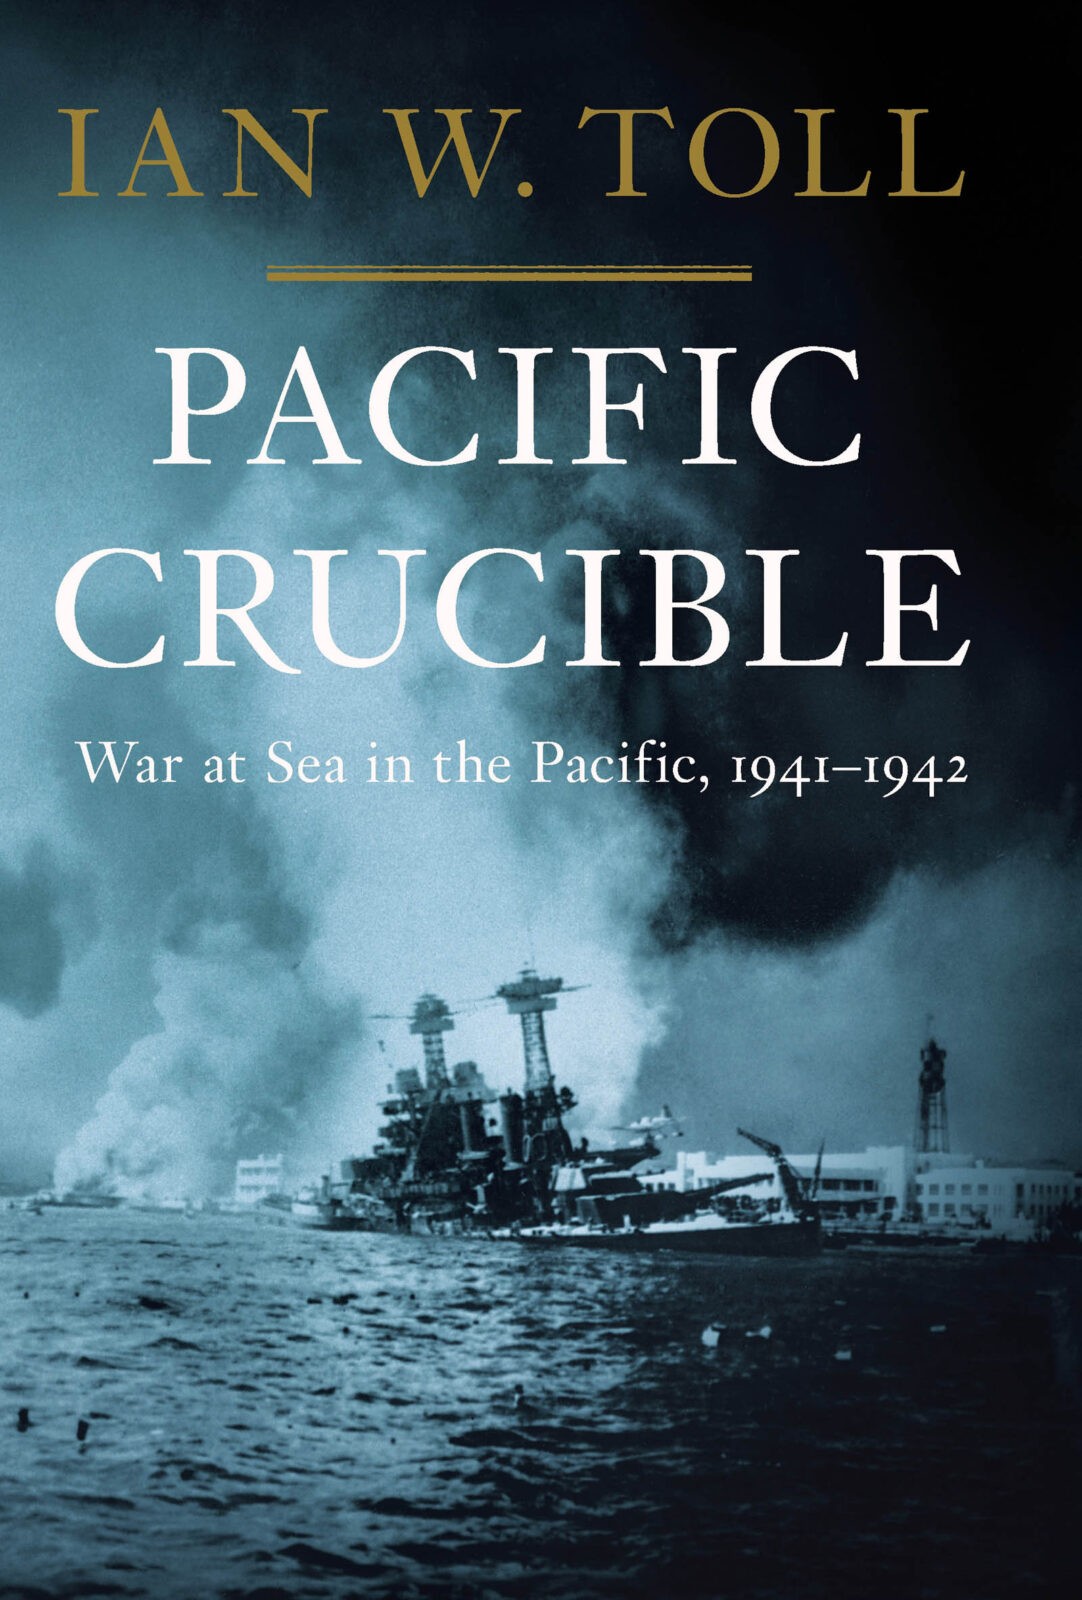 Pacific Crucible: War at Sea in the Pacific, 1941-1942. (2012)